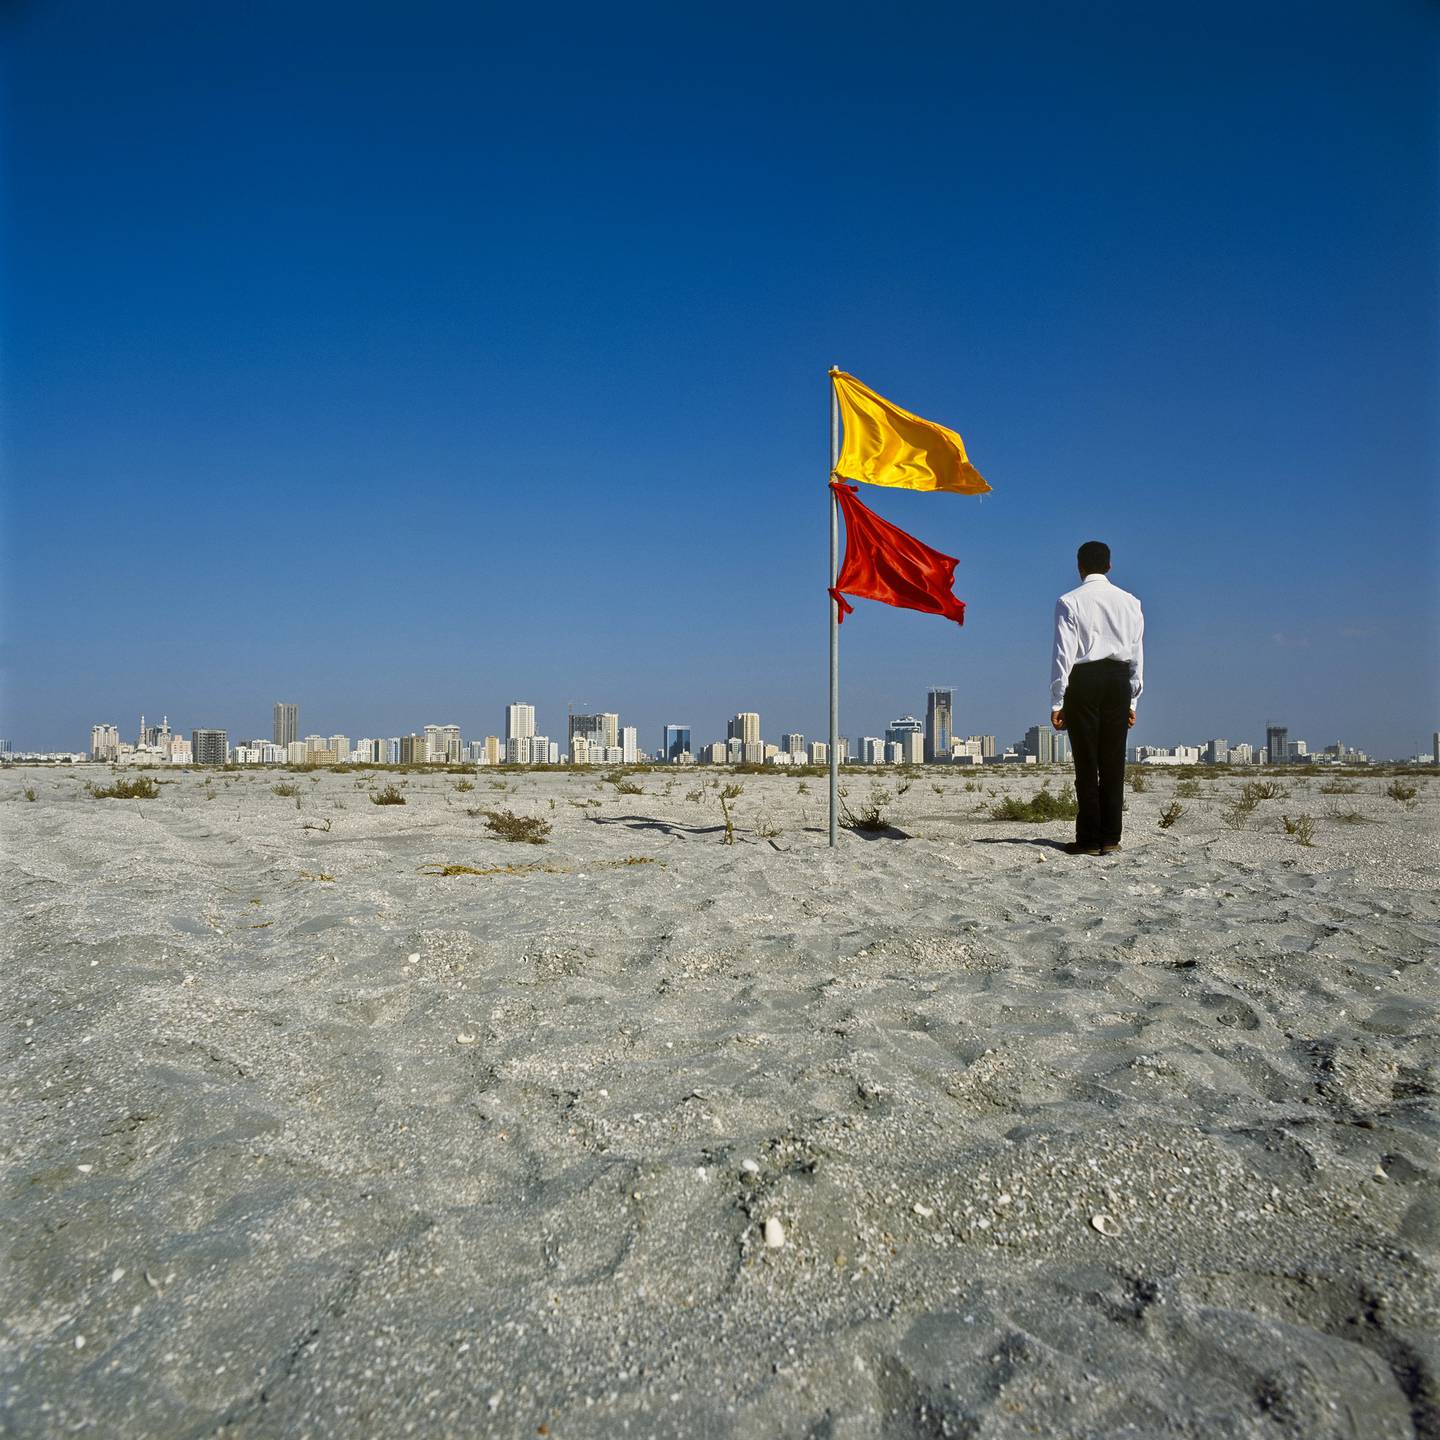 From Kazem's "Photographs with Flags" series. Photo: Mohammed Kazem